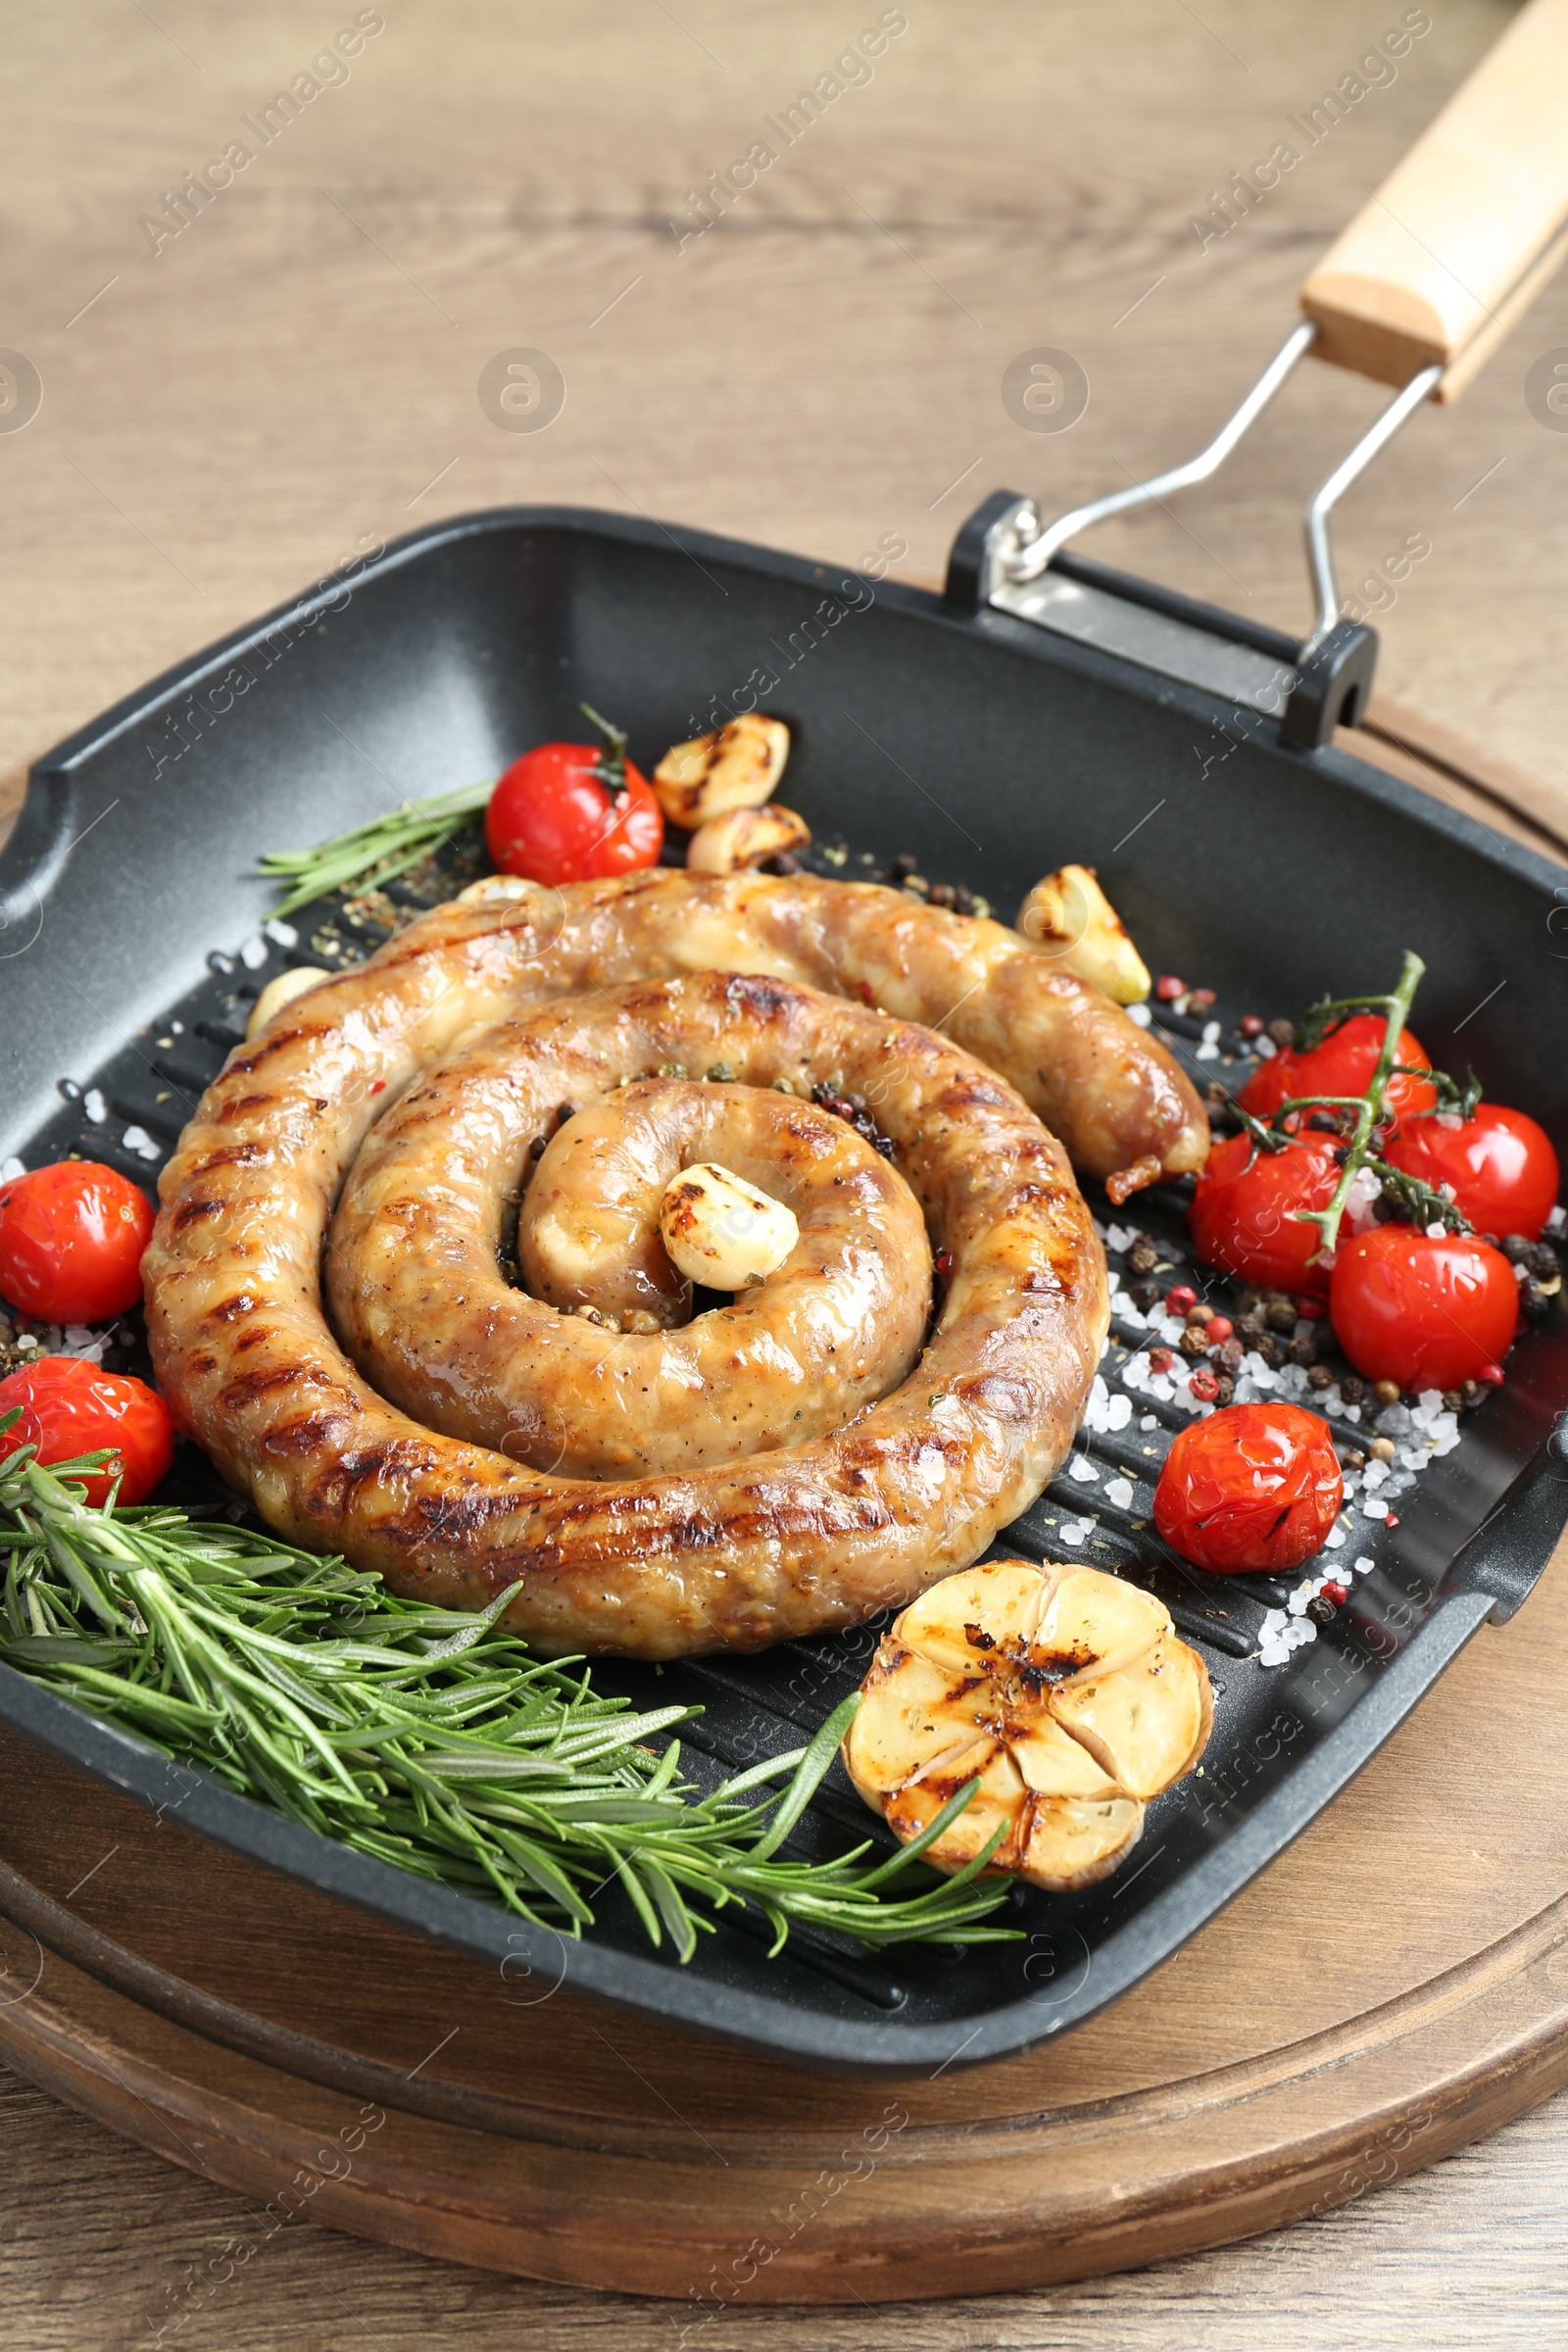 Photo of Delicious homemade sausage with garlic, tomatoes, rosemary and spices in grill pan on wooden table, closeup